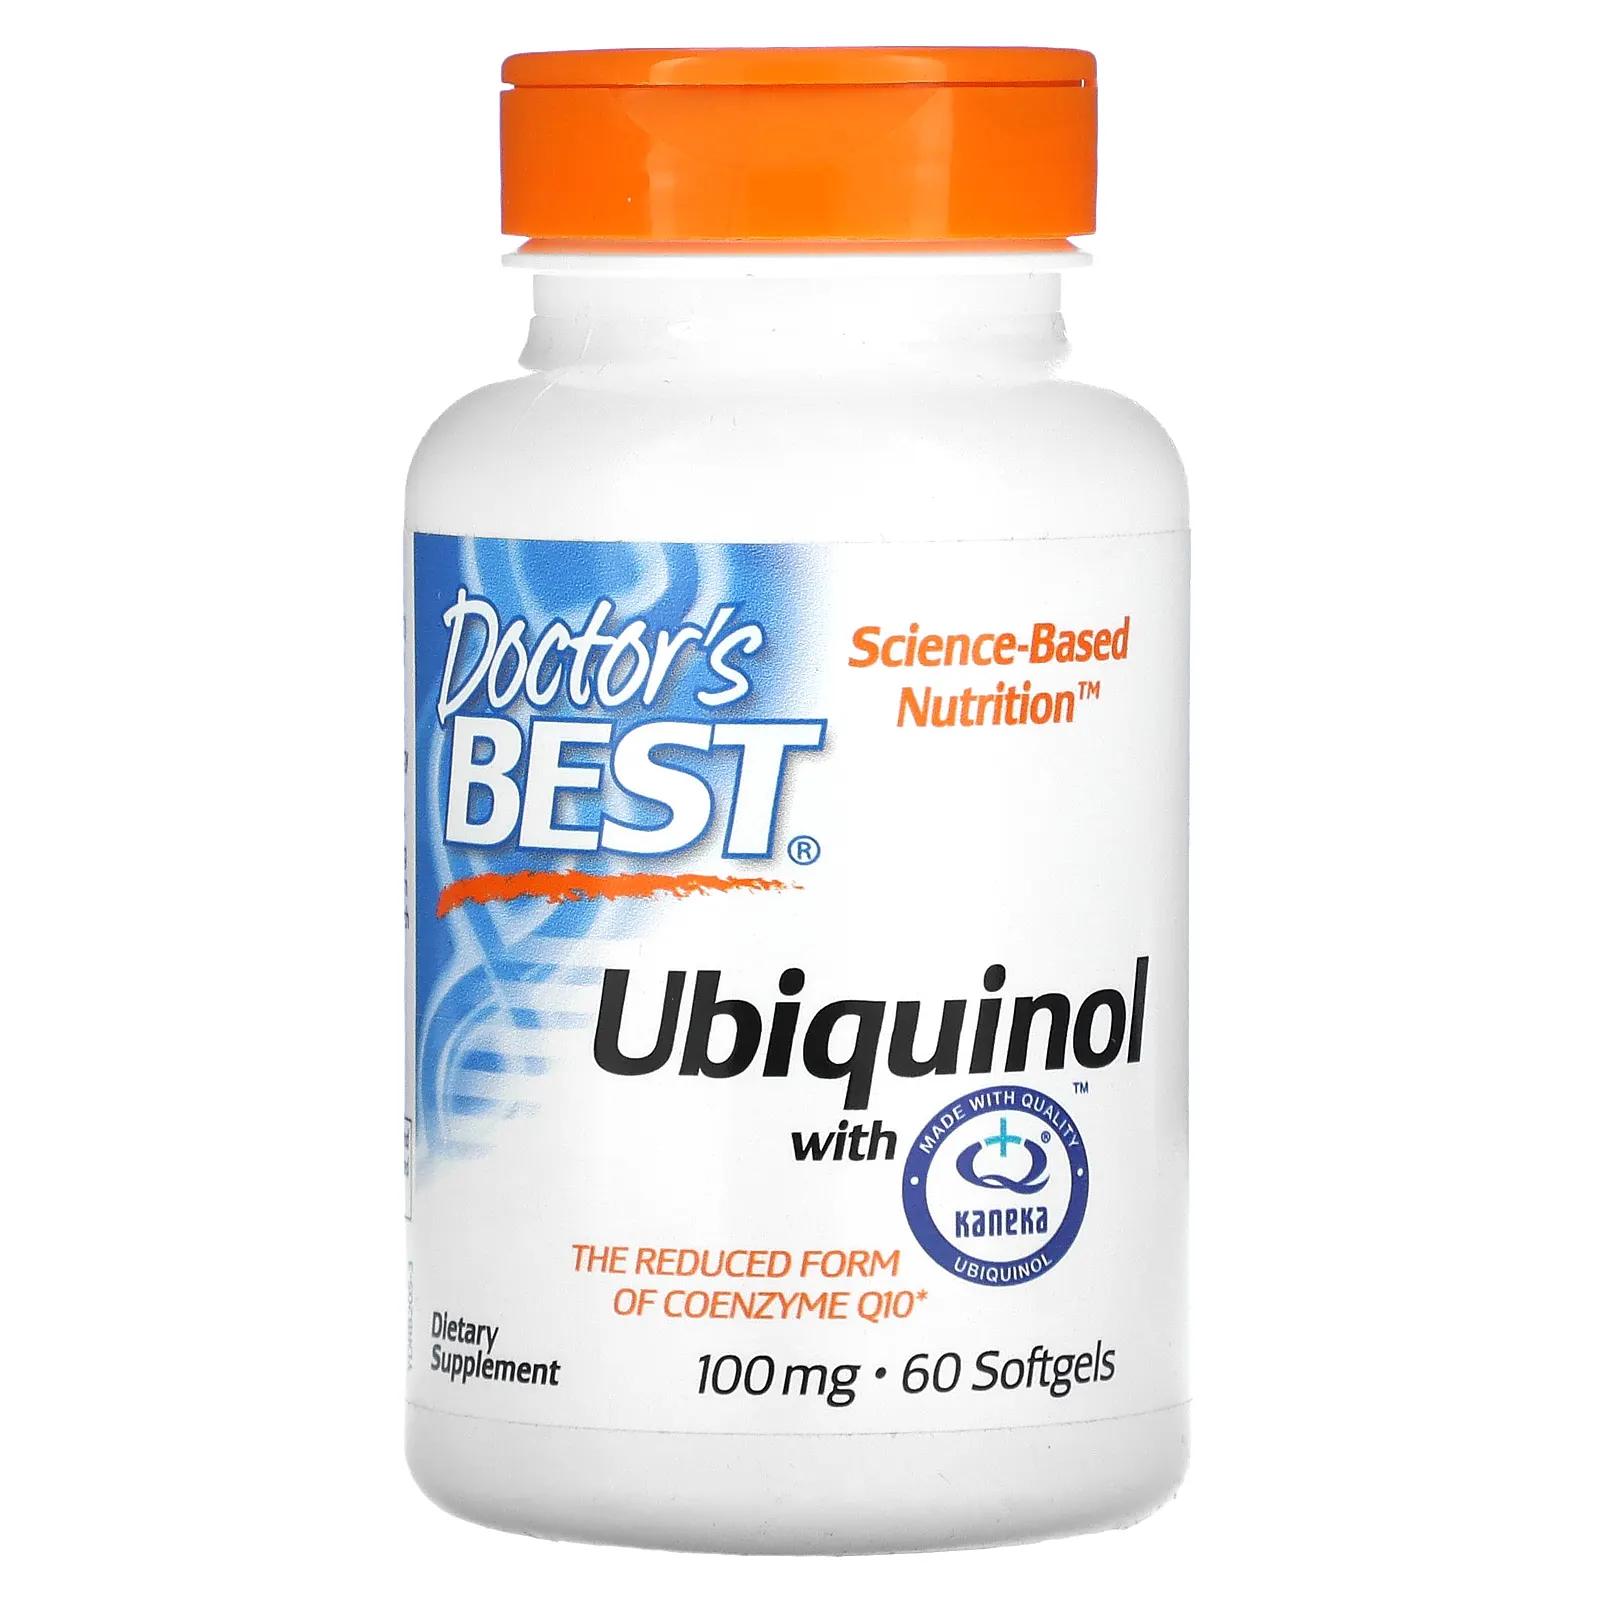 life extension super ubiquinol coq10 with enhanced mitochondrial support 100 mg 60 softgels Doctor's Best Ubiquinol with Kaneka 100 mg 60 Softgels